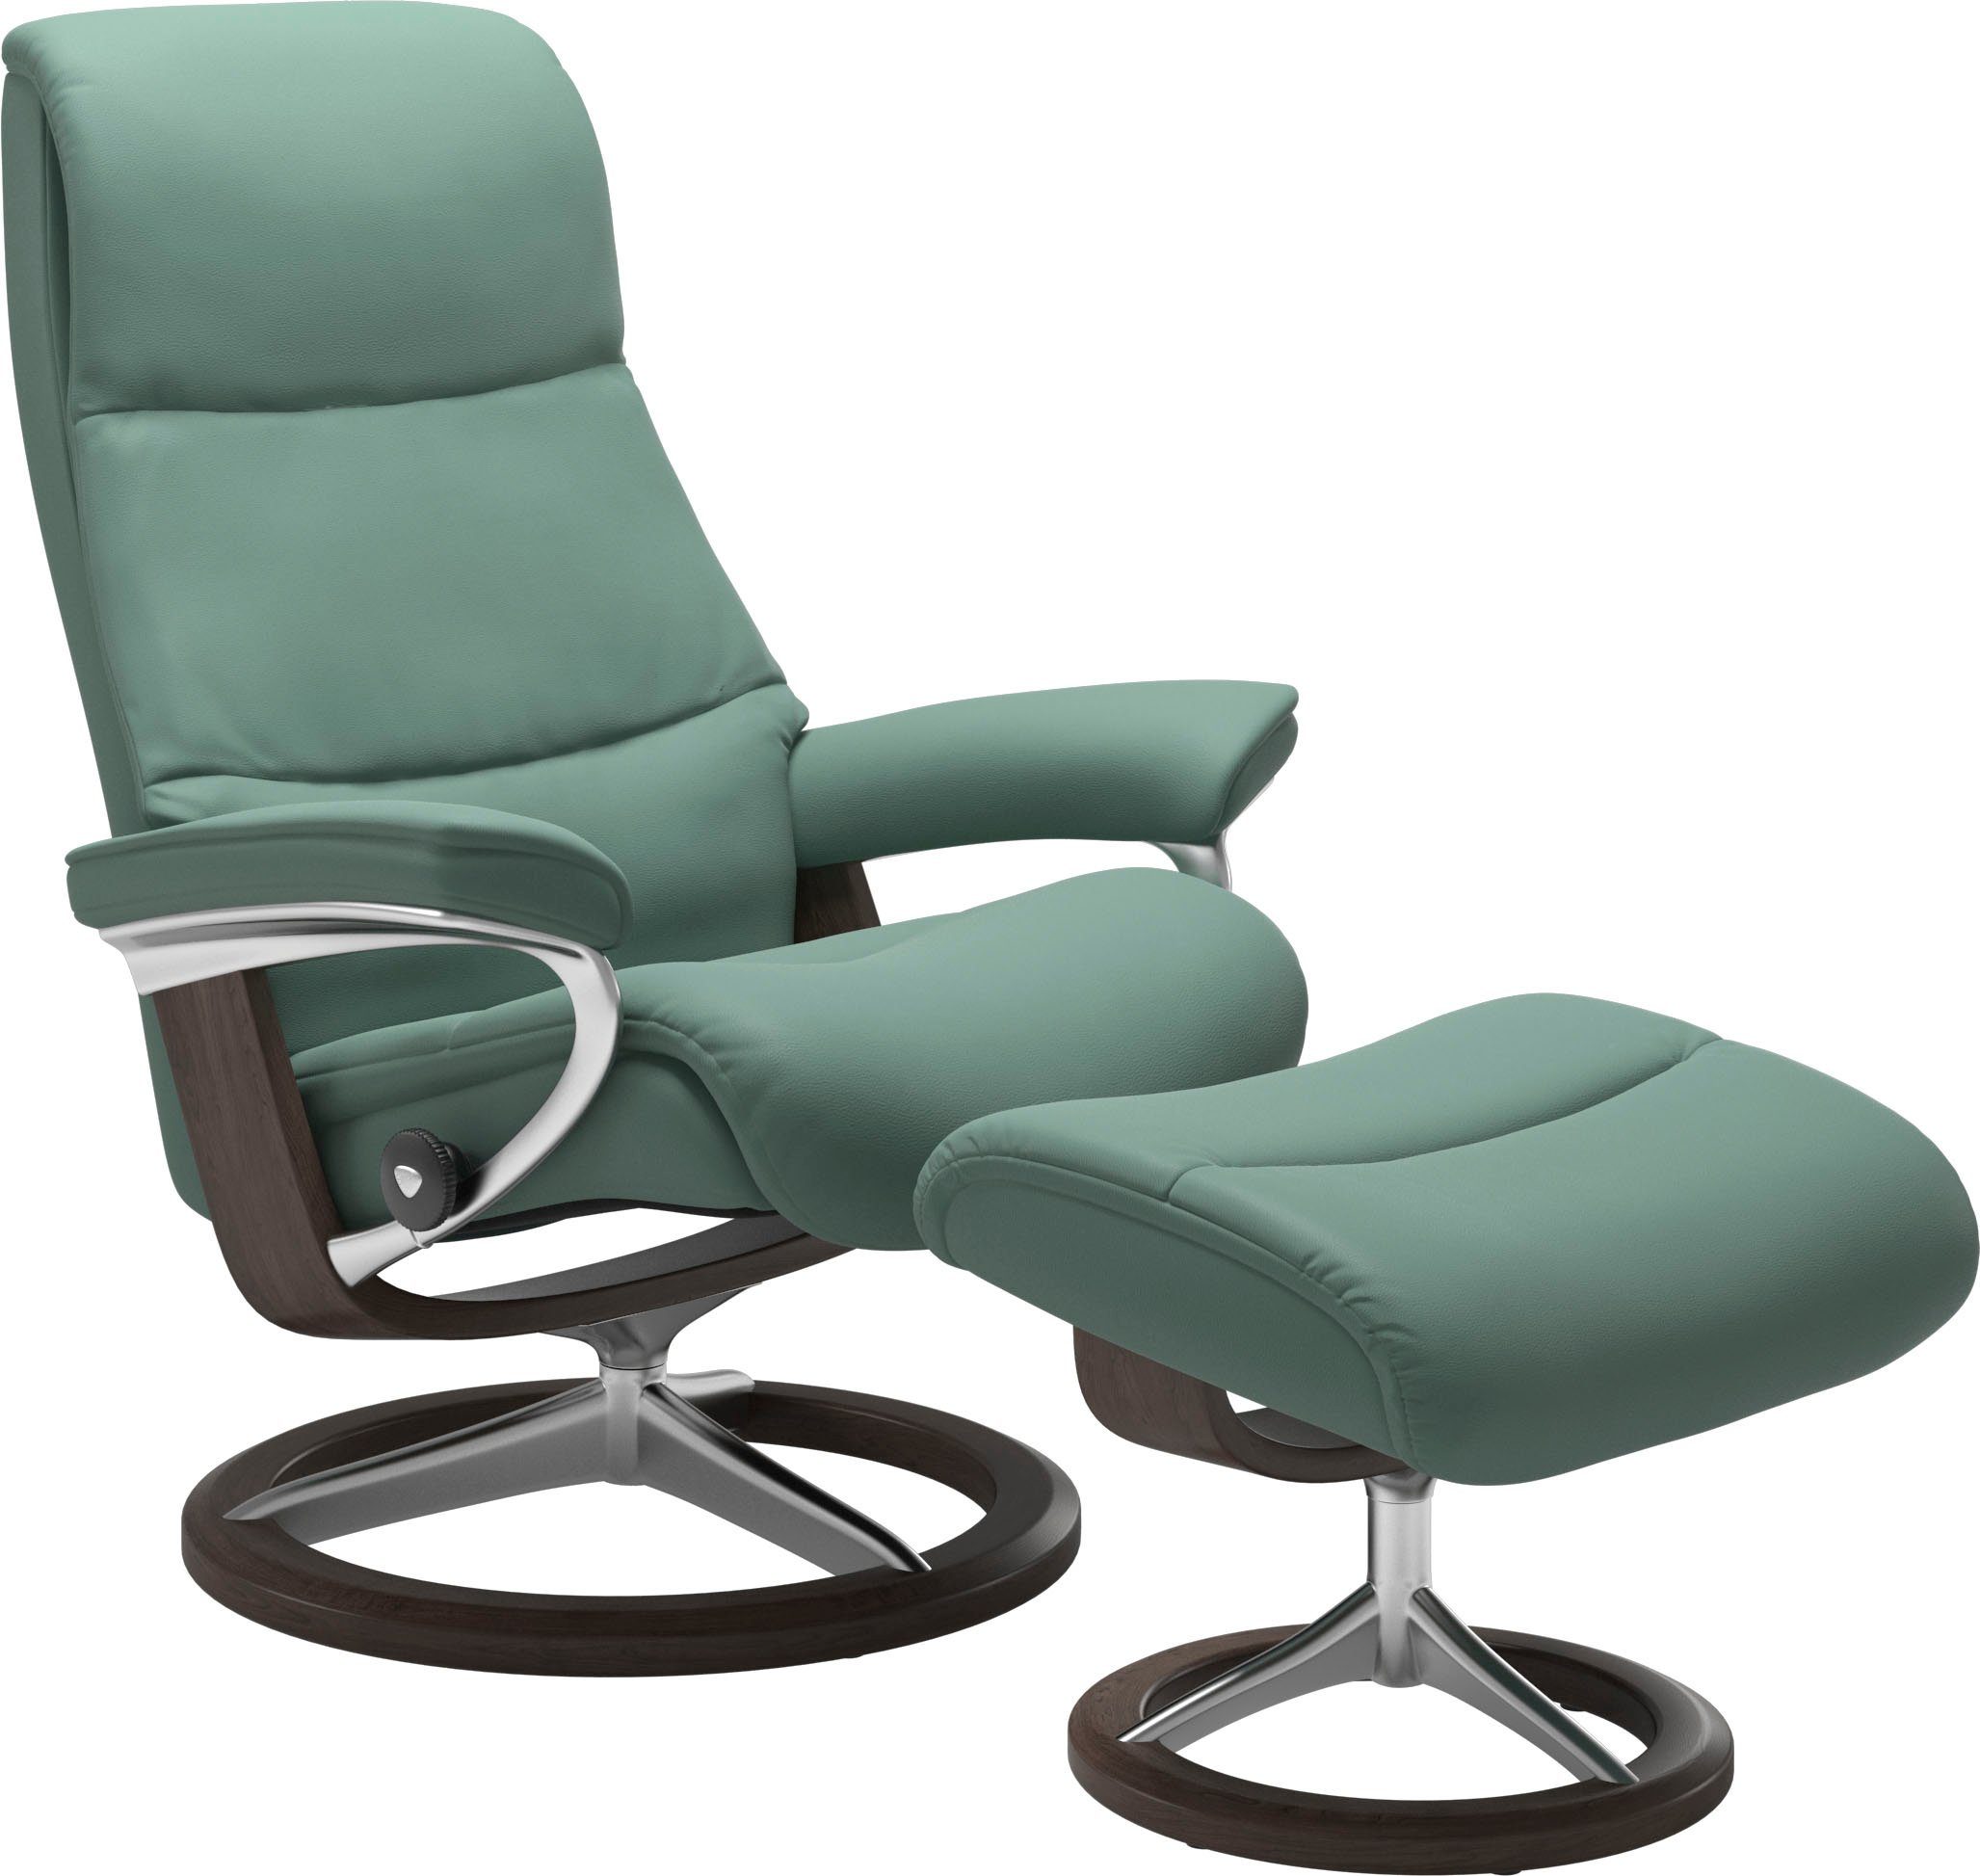 mit Relaxsessel Base, Wenge Stressless® S,Gestell View, Signature Größe